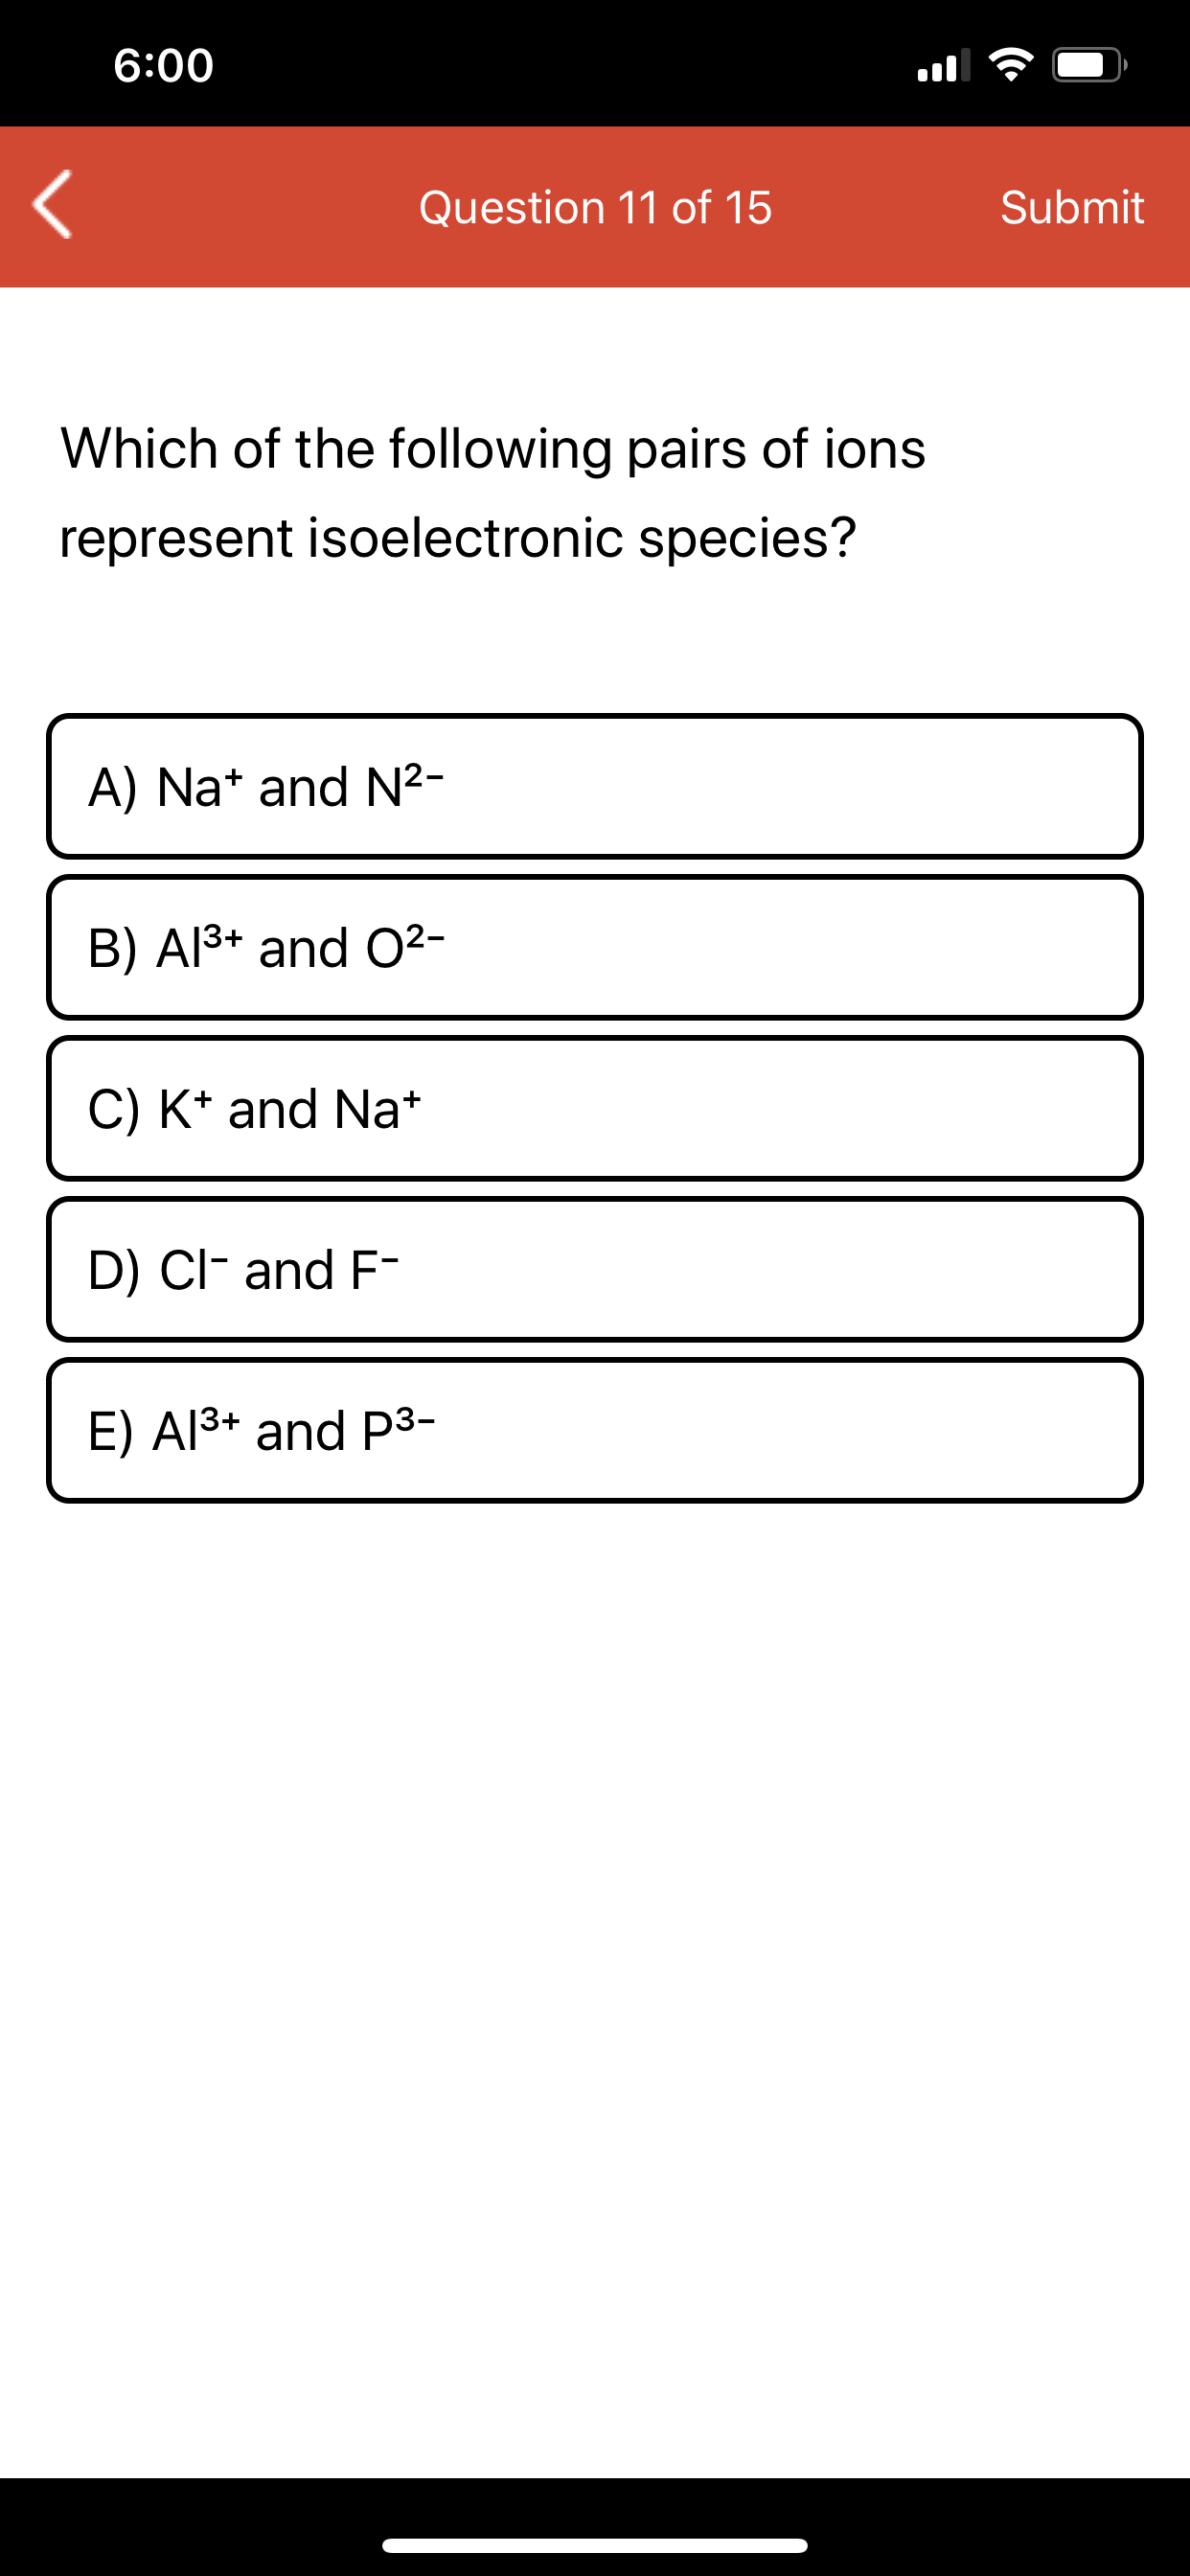 Which of the following pairs of ions
represent isoelectronic species?
A) Na* and N²-
B) A13+ and 02-
C) K* and Na*
D) Cl- and F-
E) Al3+ and P3-
